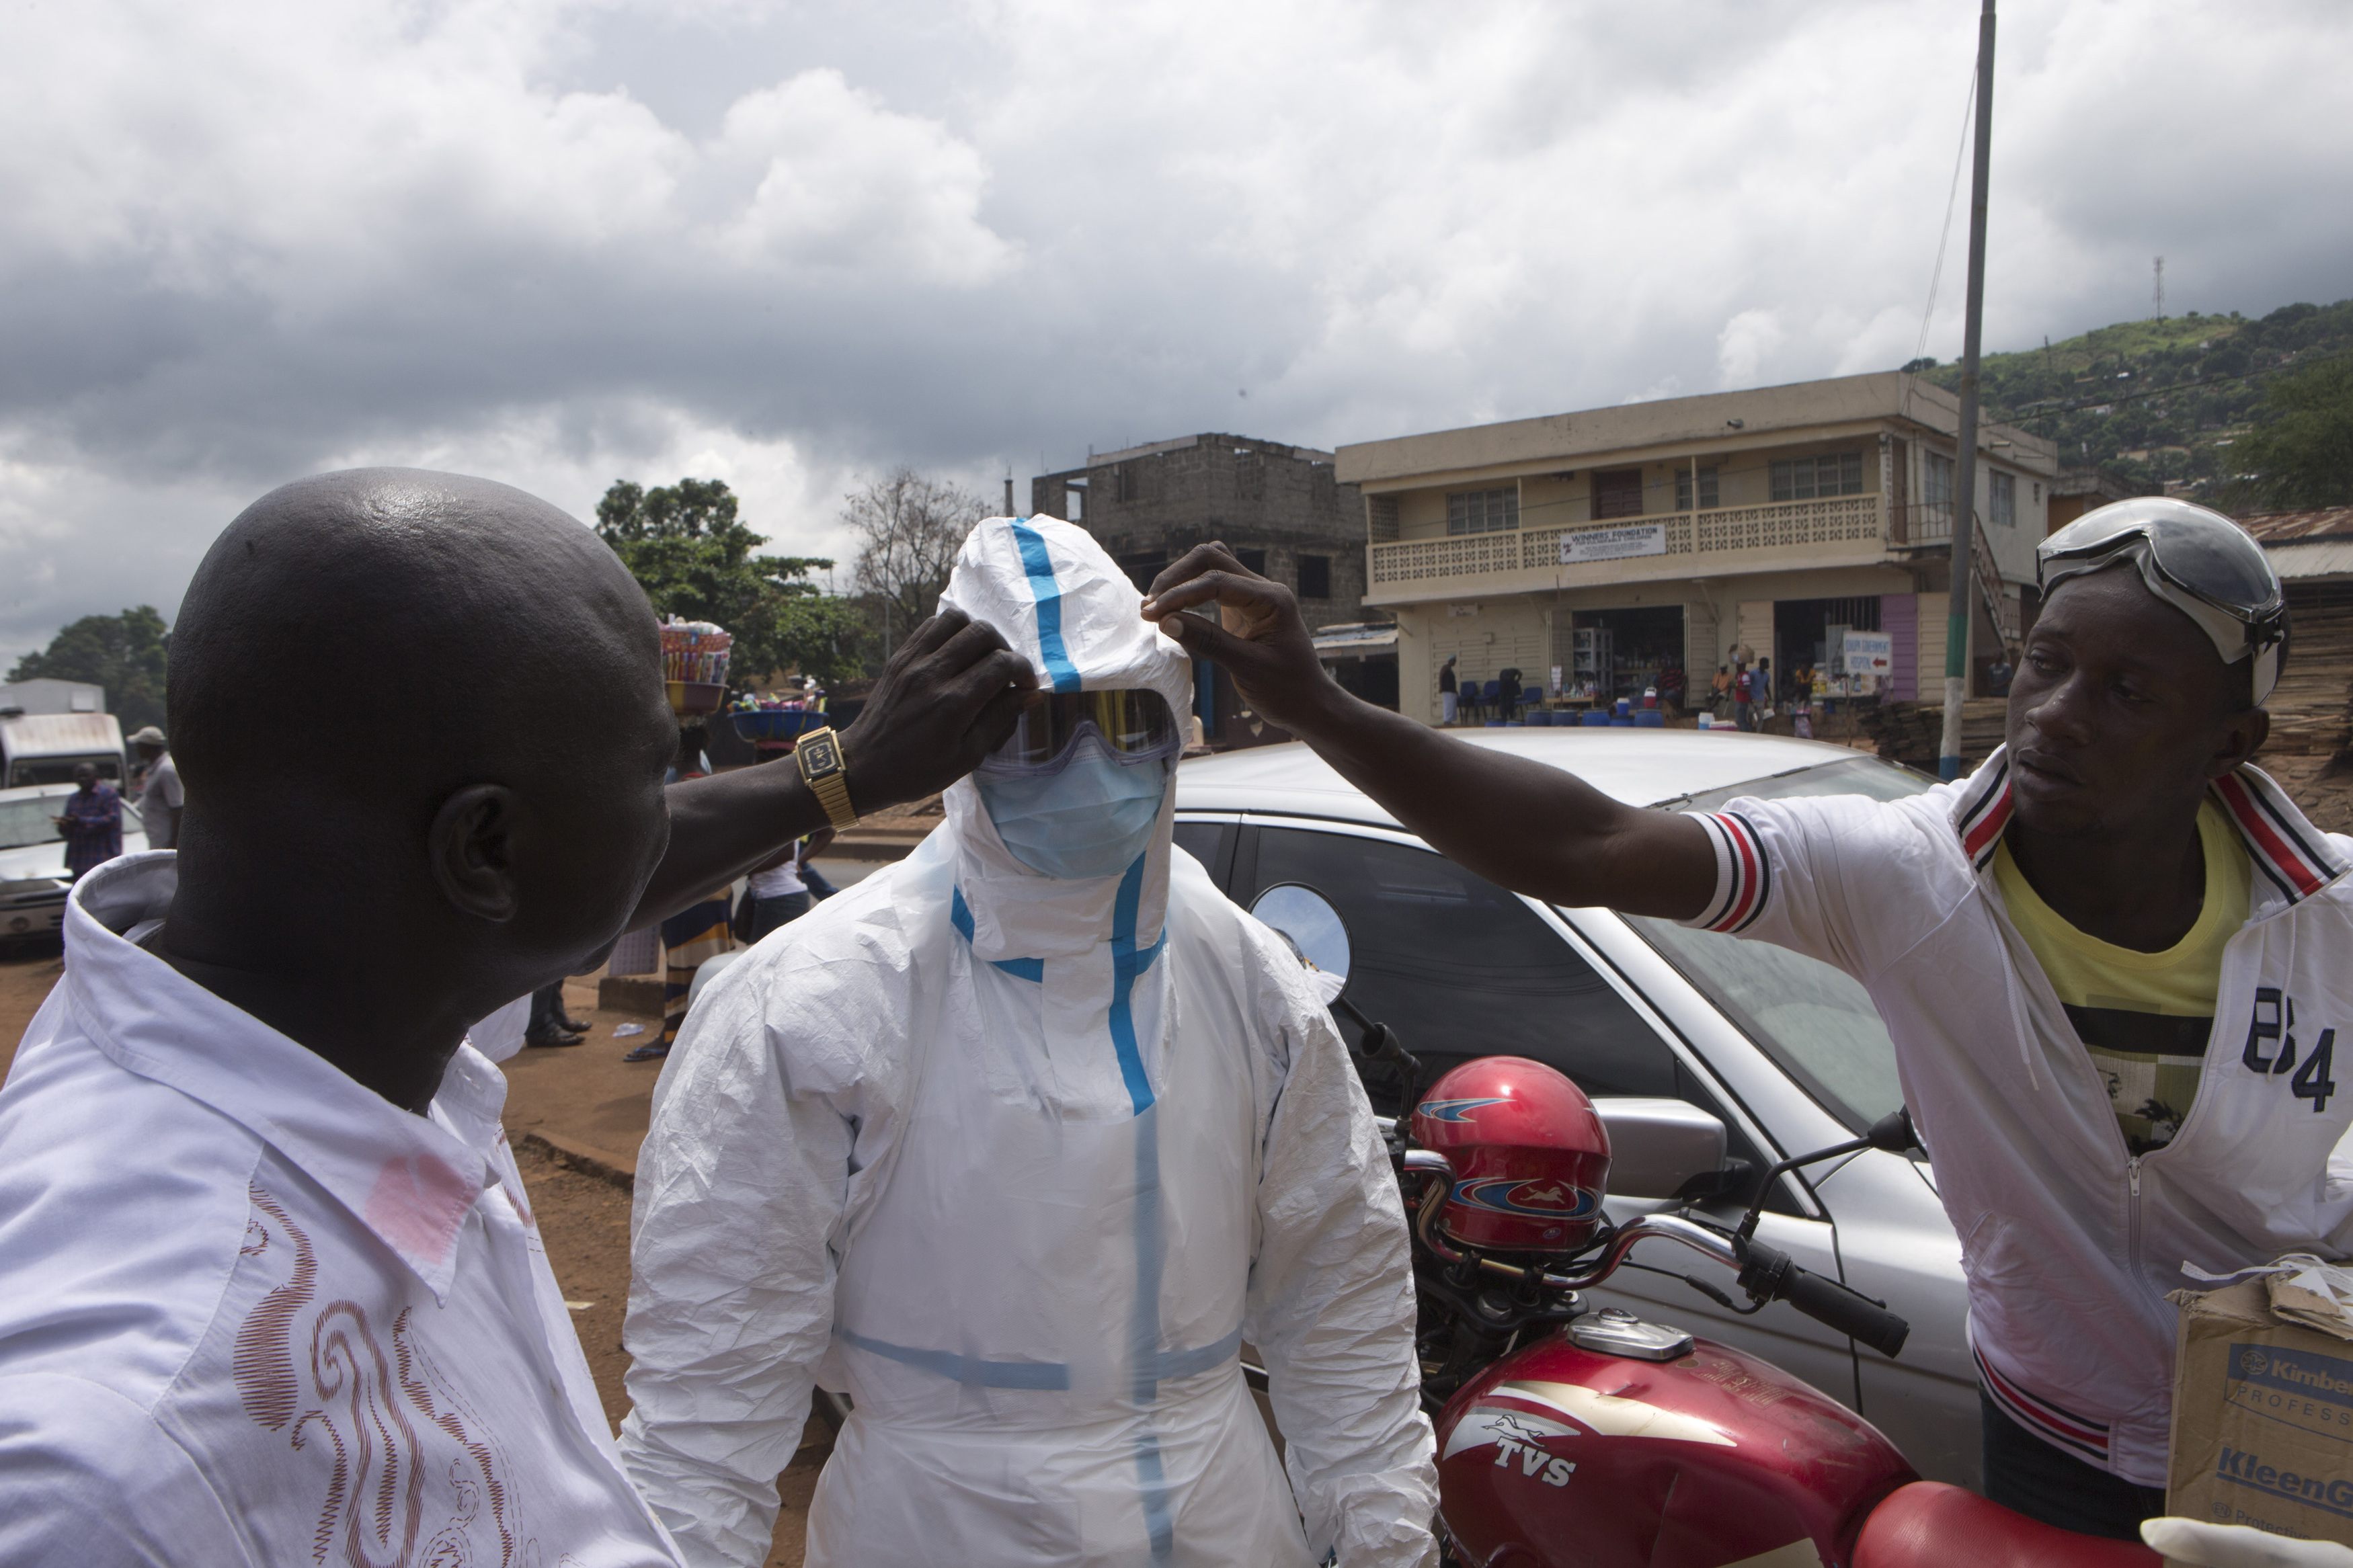 Fifth Sierra Leone Doctor Dies after Contracting Ebola